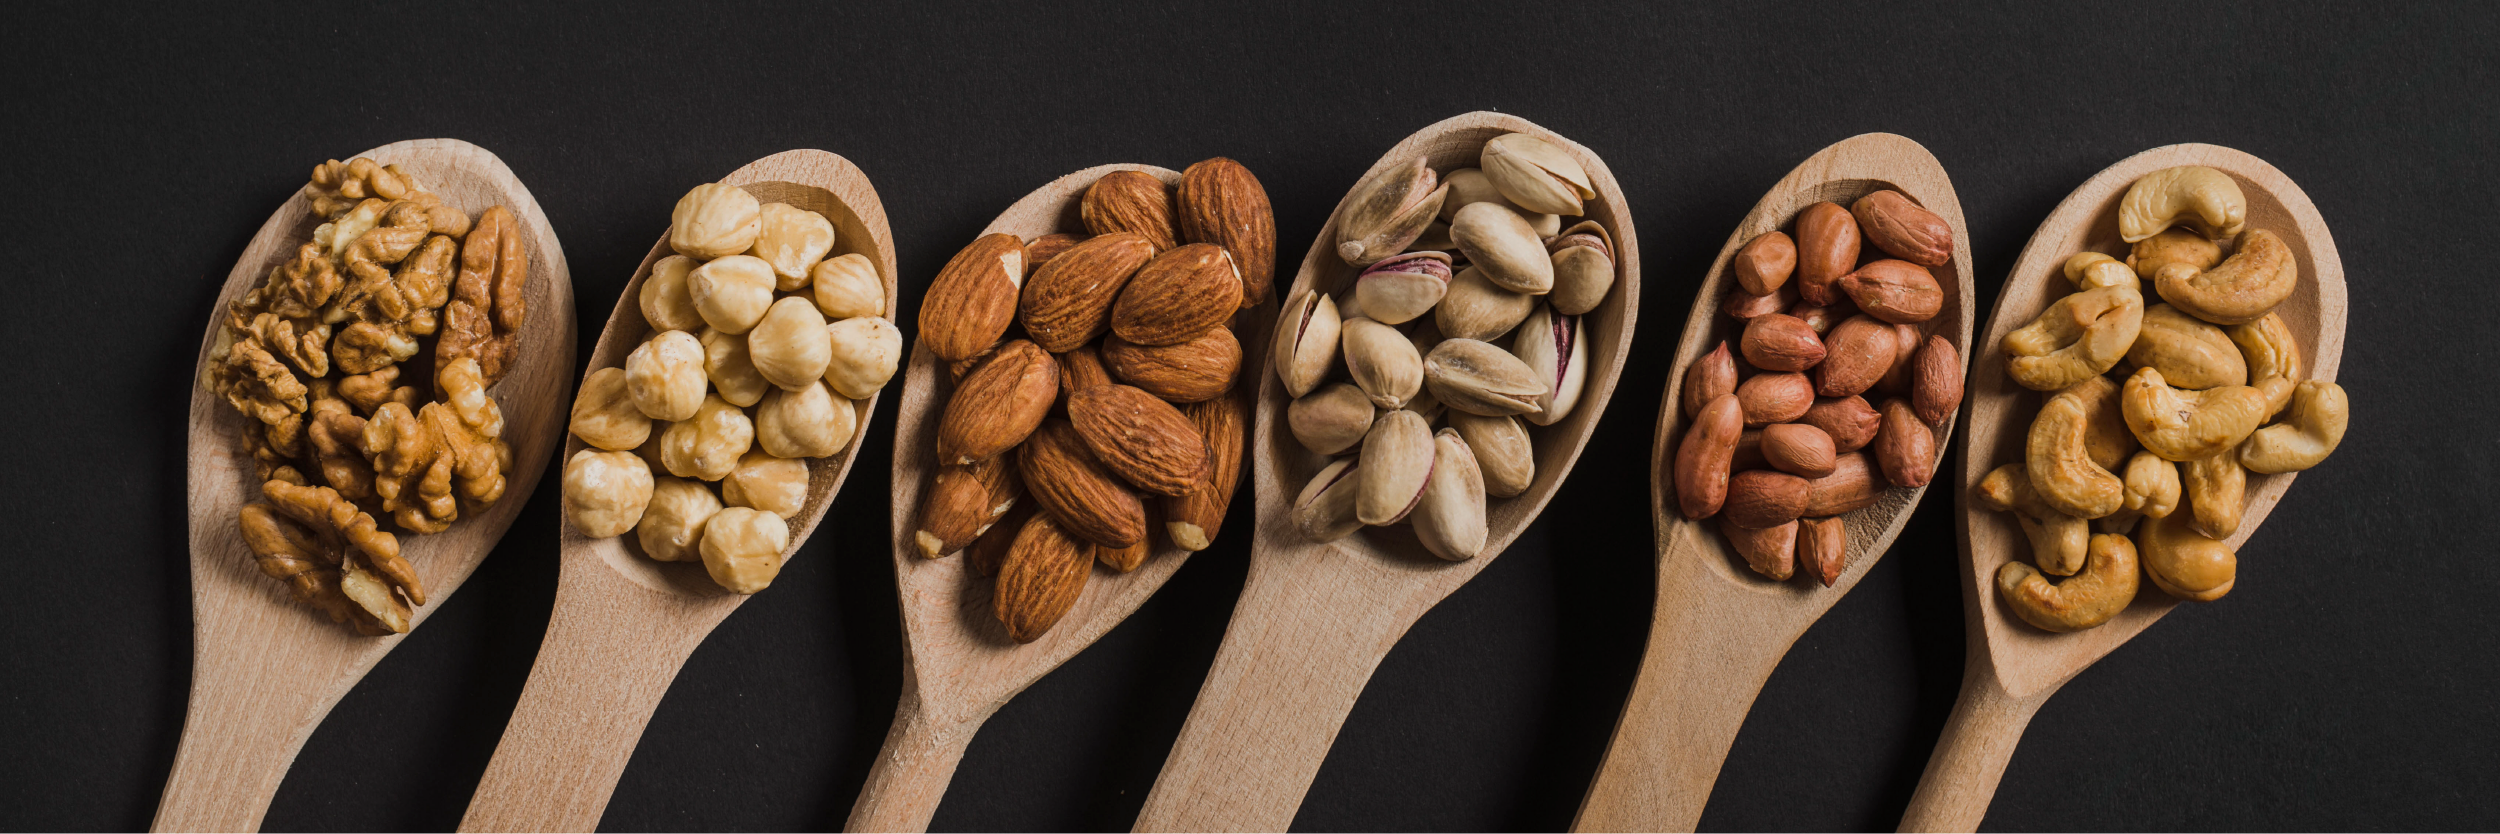 Make your own mixed nuts by choosing the natural baked type which are much healthier.